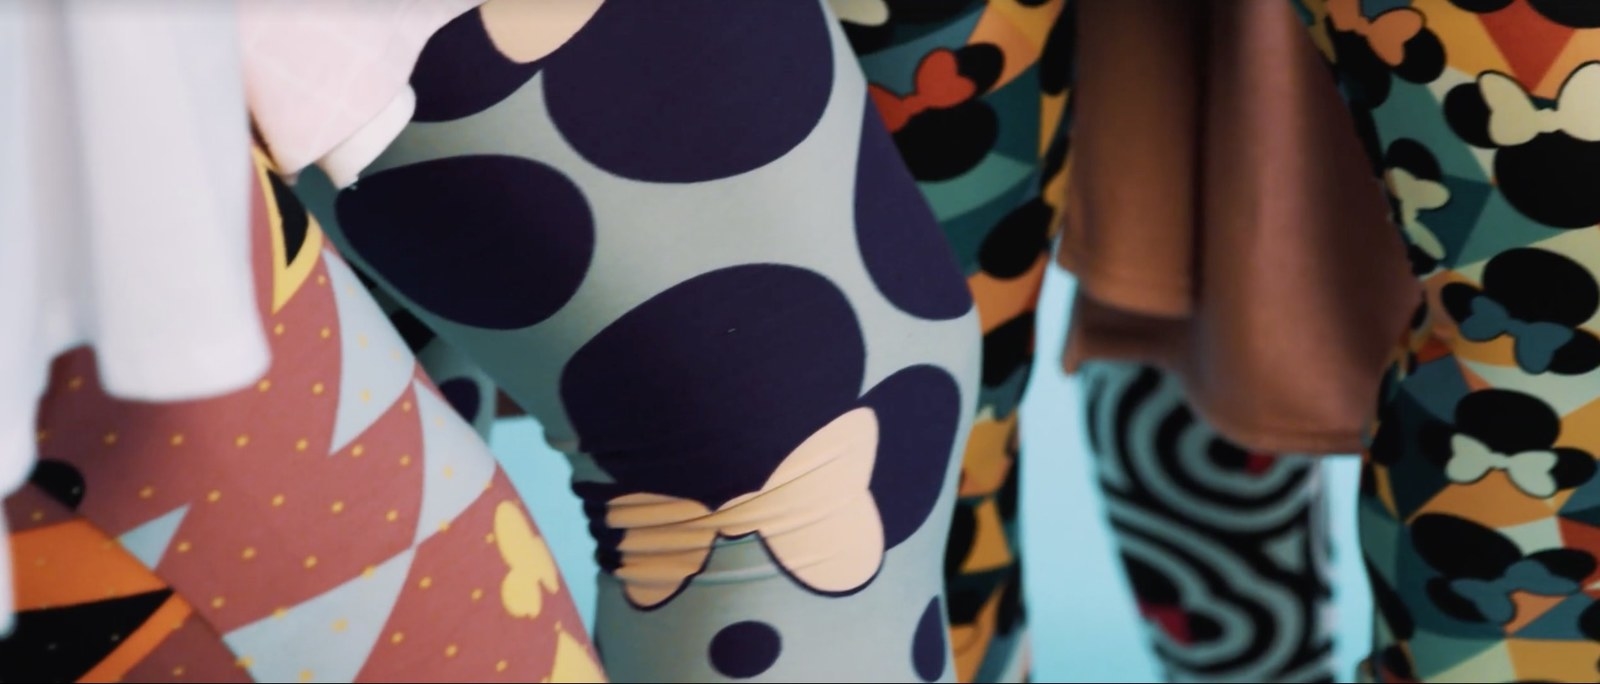 In love with the LuLaRoe Collection for Disney?